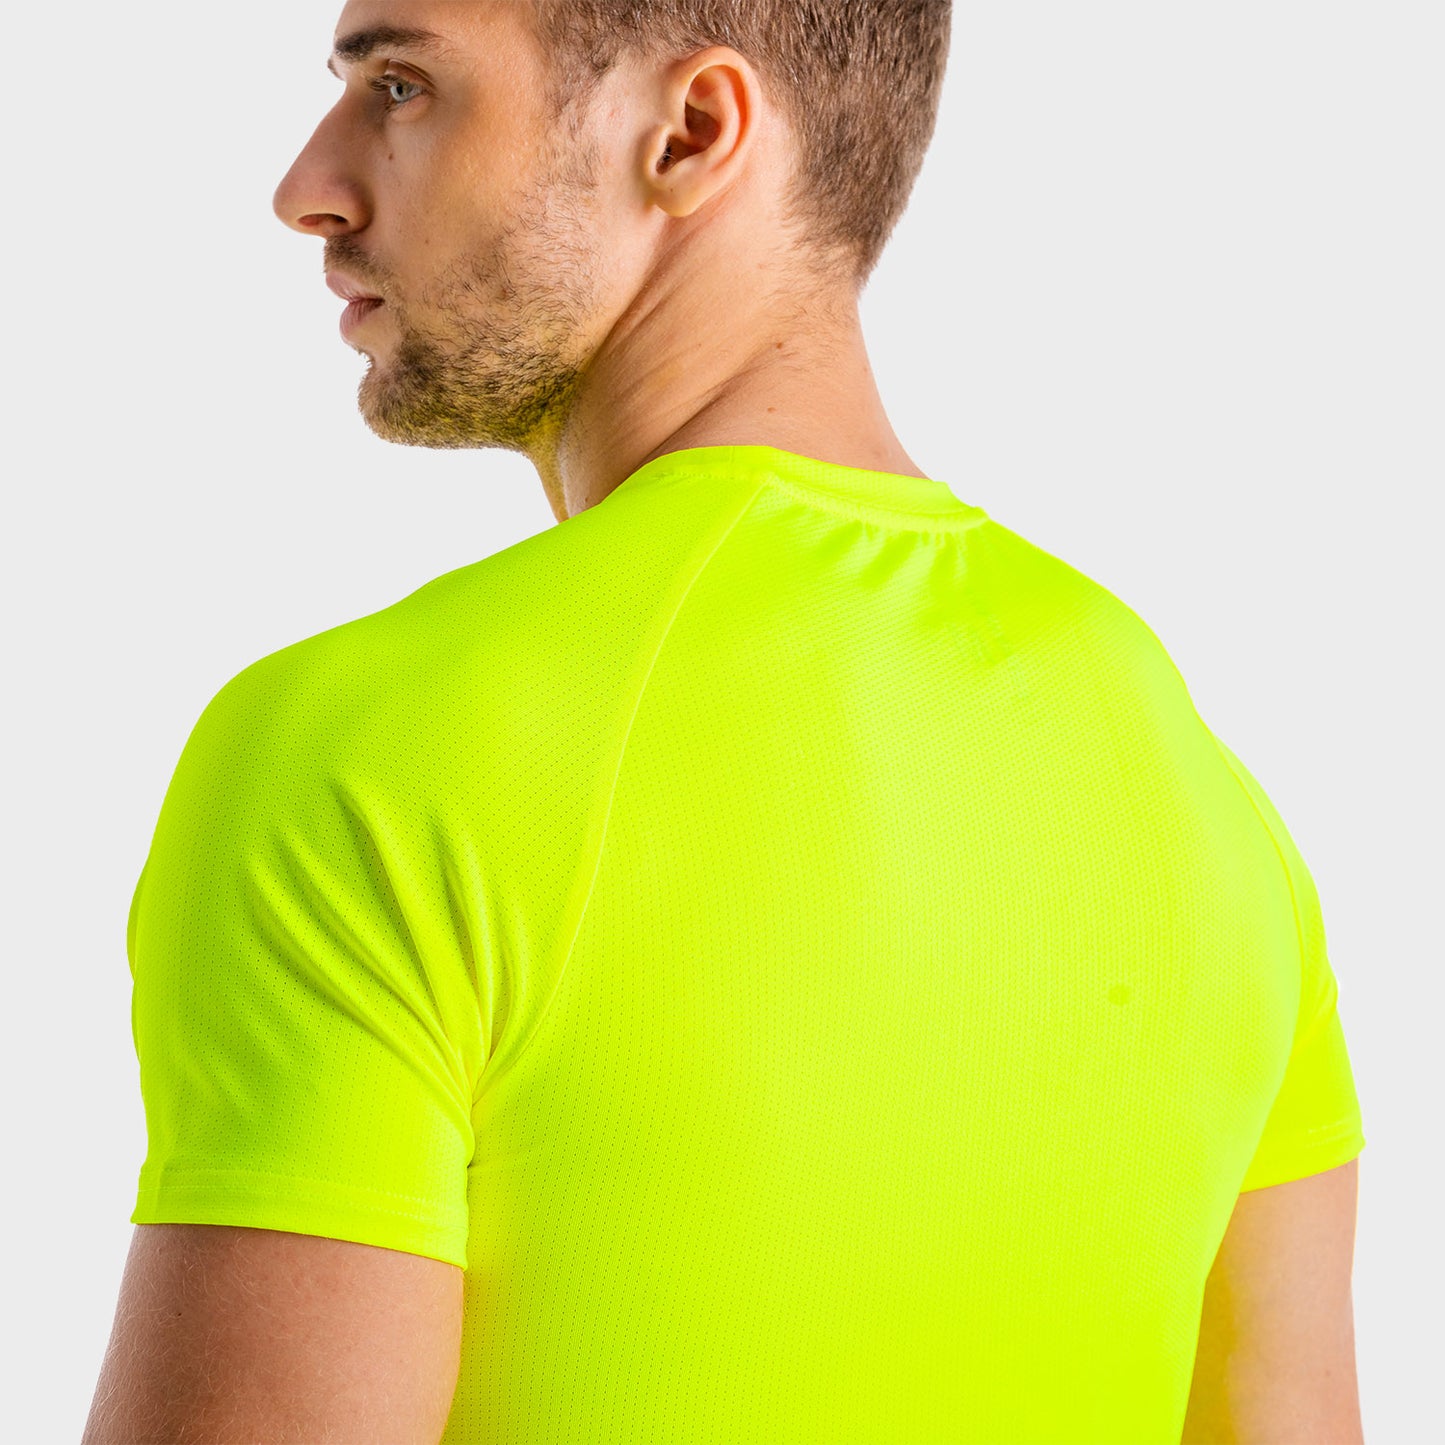 squatwolf-gym-wear-core-mesh-tee-neon-workout-shirts-for-men